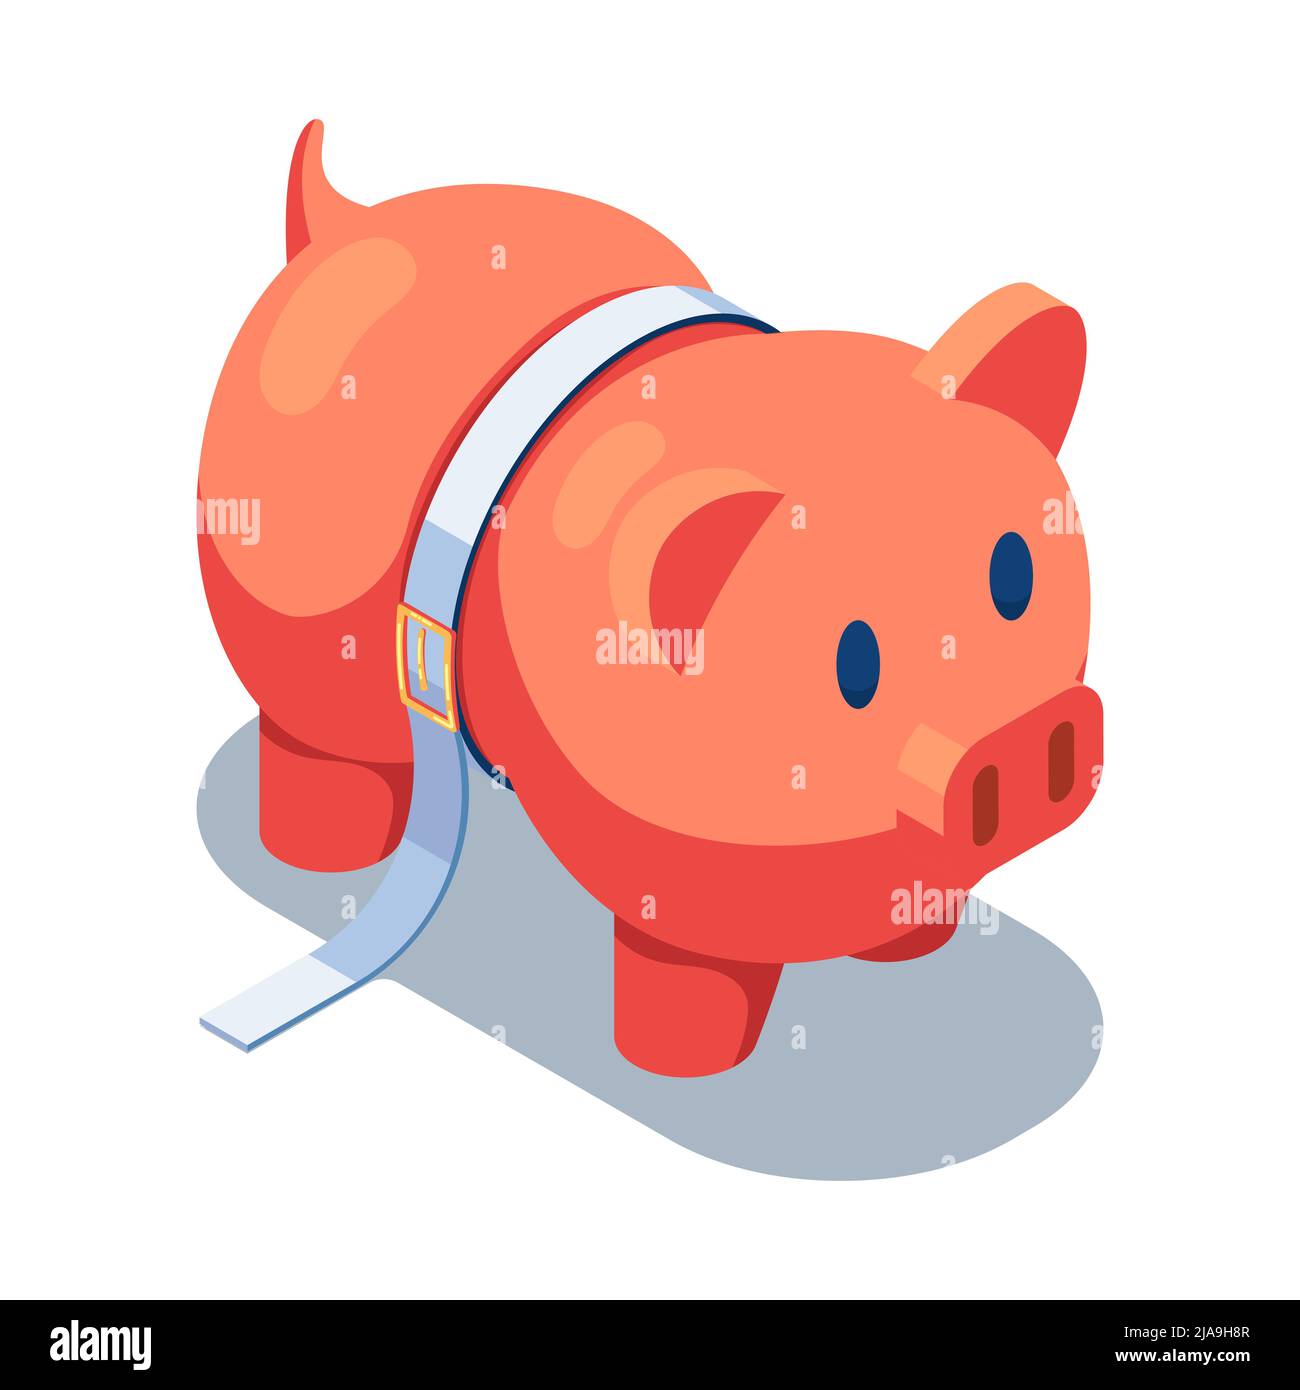 Flat 3d Isometric Piggy Bank Squeezed by A Tighten Belt. Money Management and Financial Crisis Concept. Stock Vector